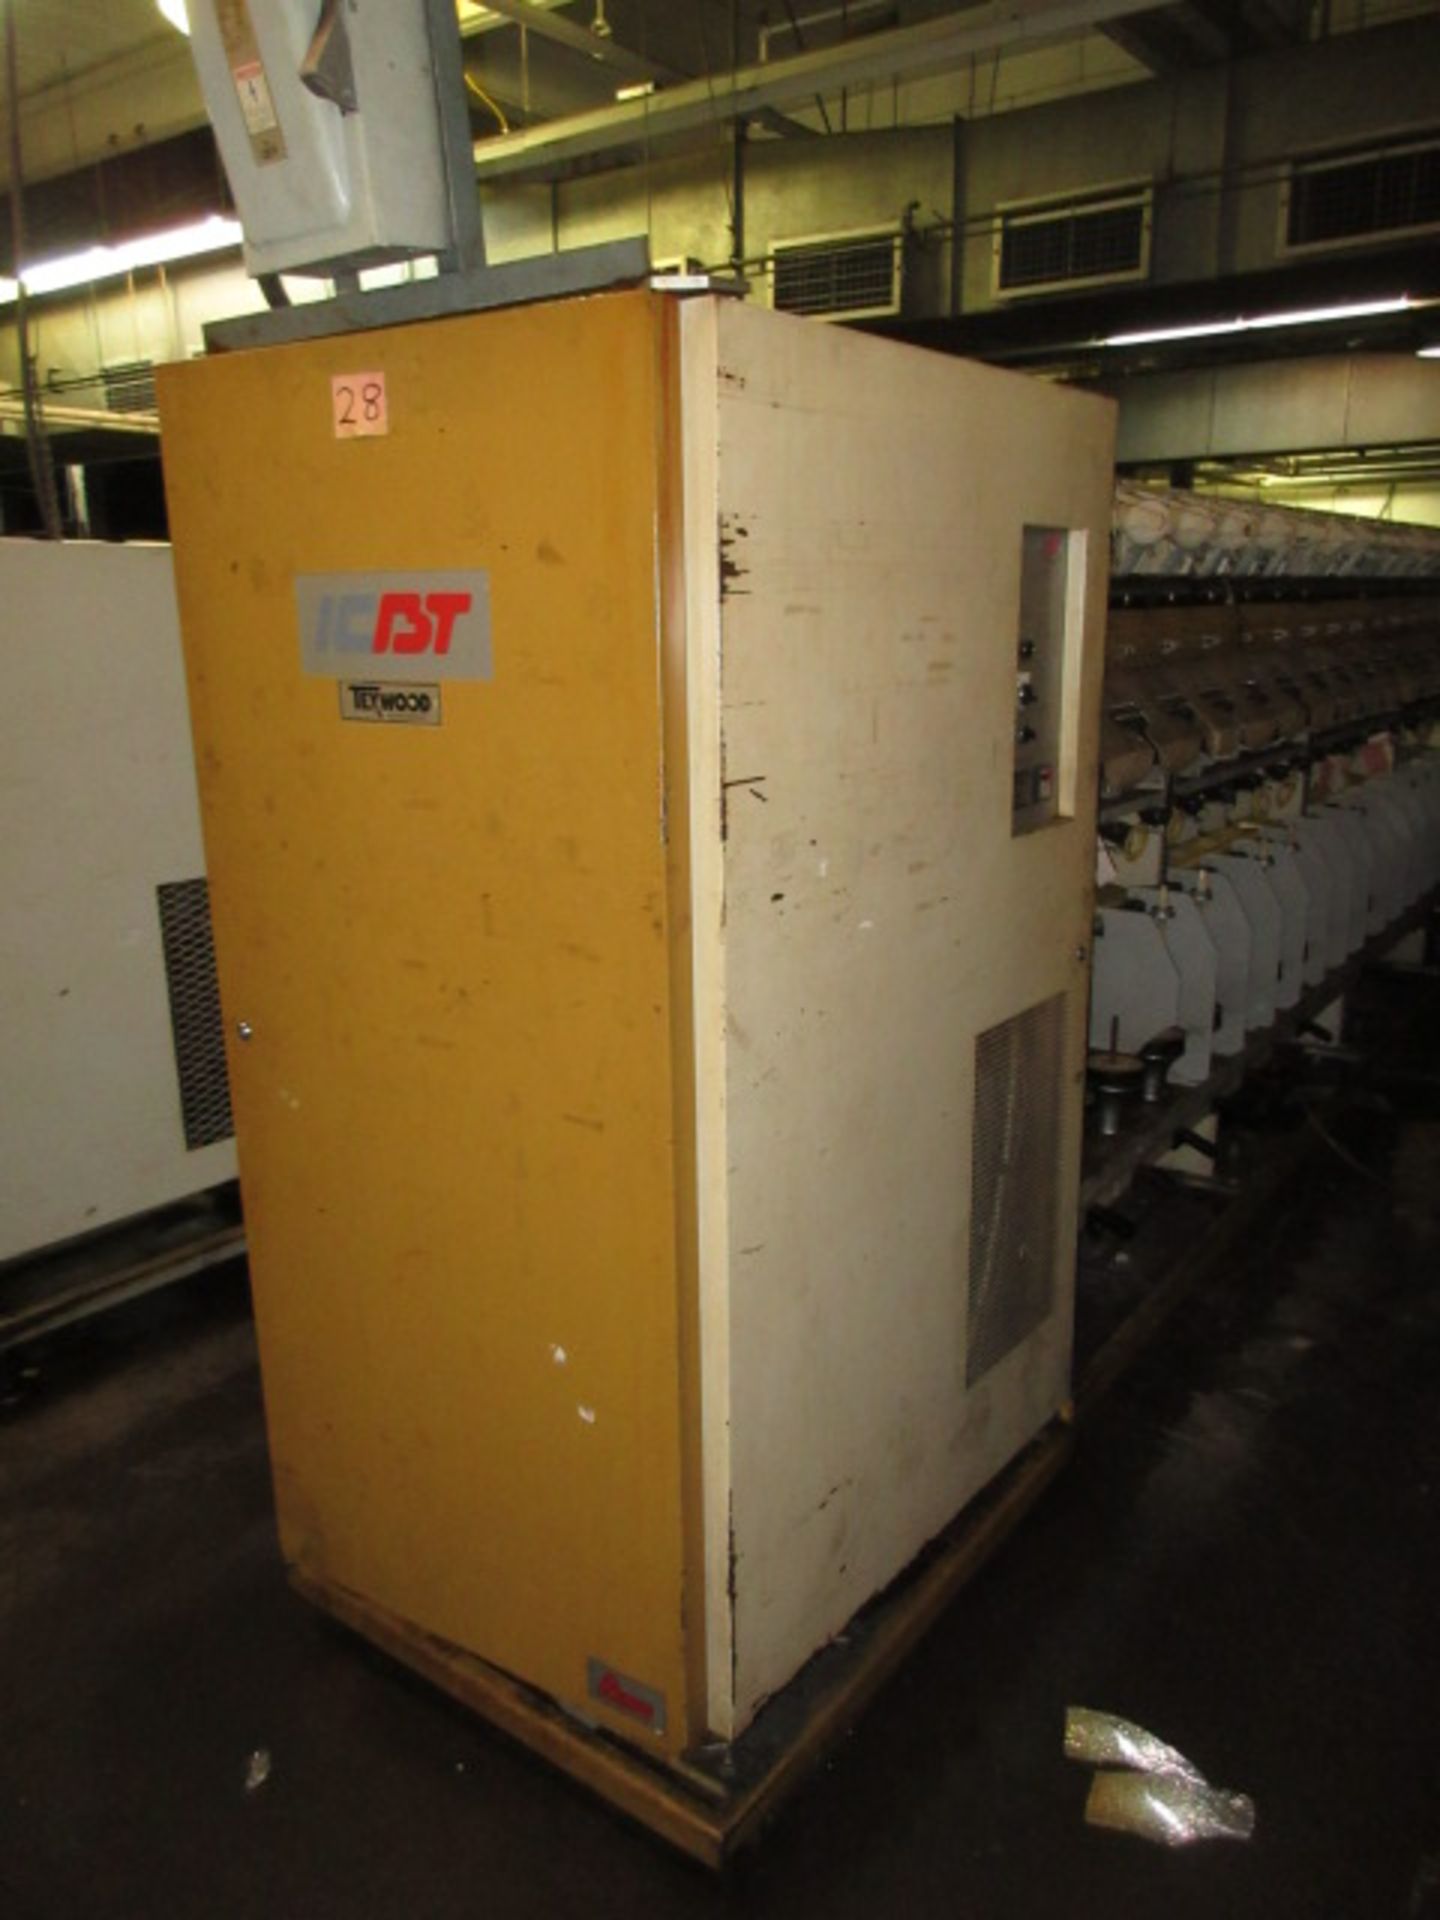 ICBT/Texwood Inc. DT355 2X1 Twister, (1988), 120 spindles. HIT# 2179257. Mach. #28. Asset Located at - Image 3 of 6